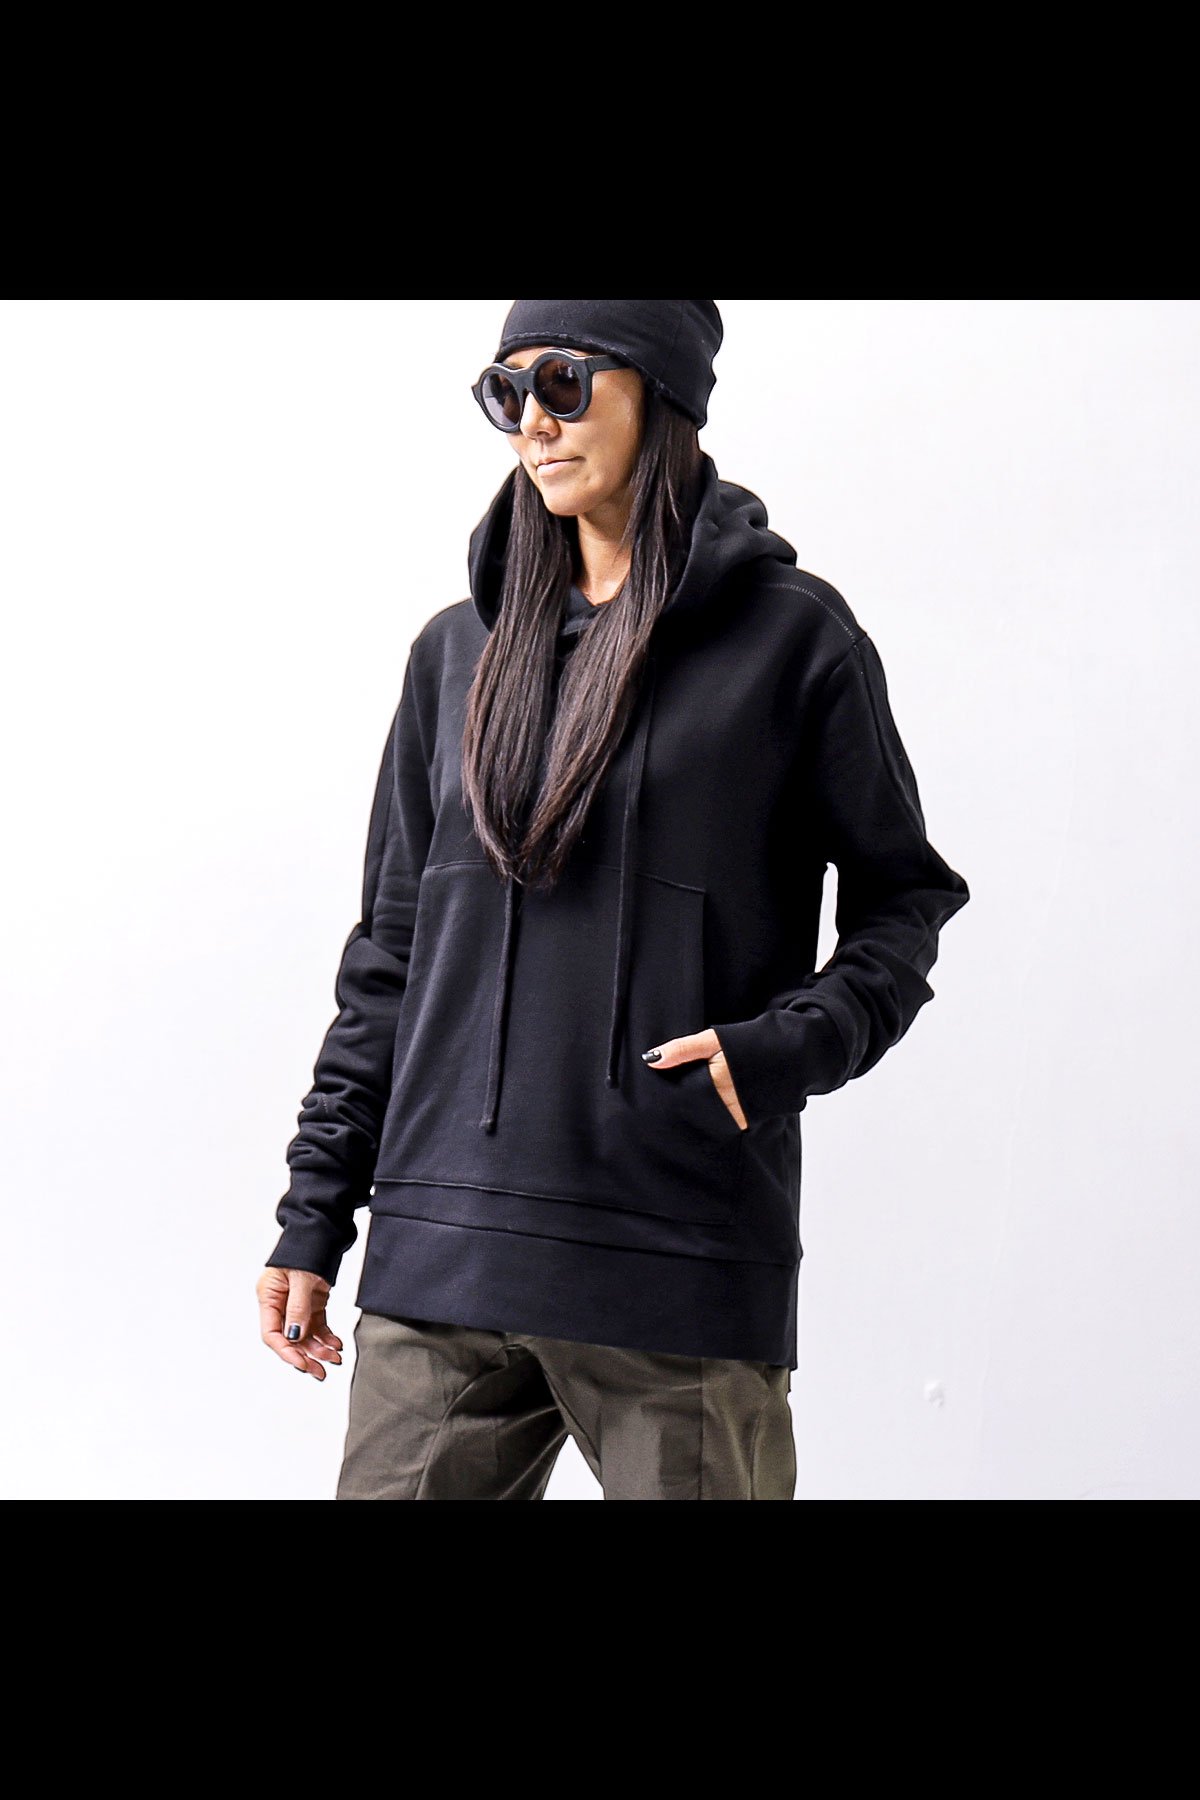 <img class='new_mark_img1' src='https://img.shop-pro.jp/img/new/icons8.gif' style='border:none;display:inline;margin:0px;padding:0px;width:auto;' />UNISEX FRONT POCKET SWEAT HOODIE MS159_BLACK